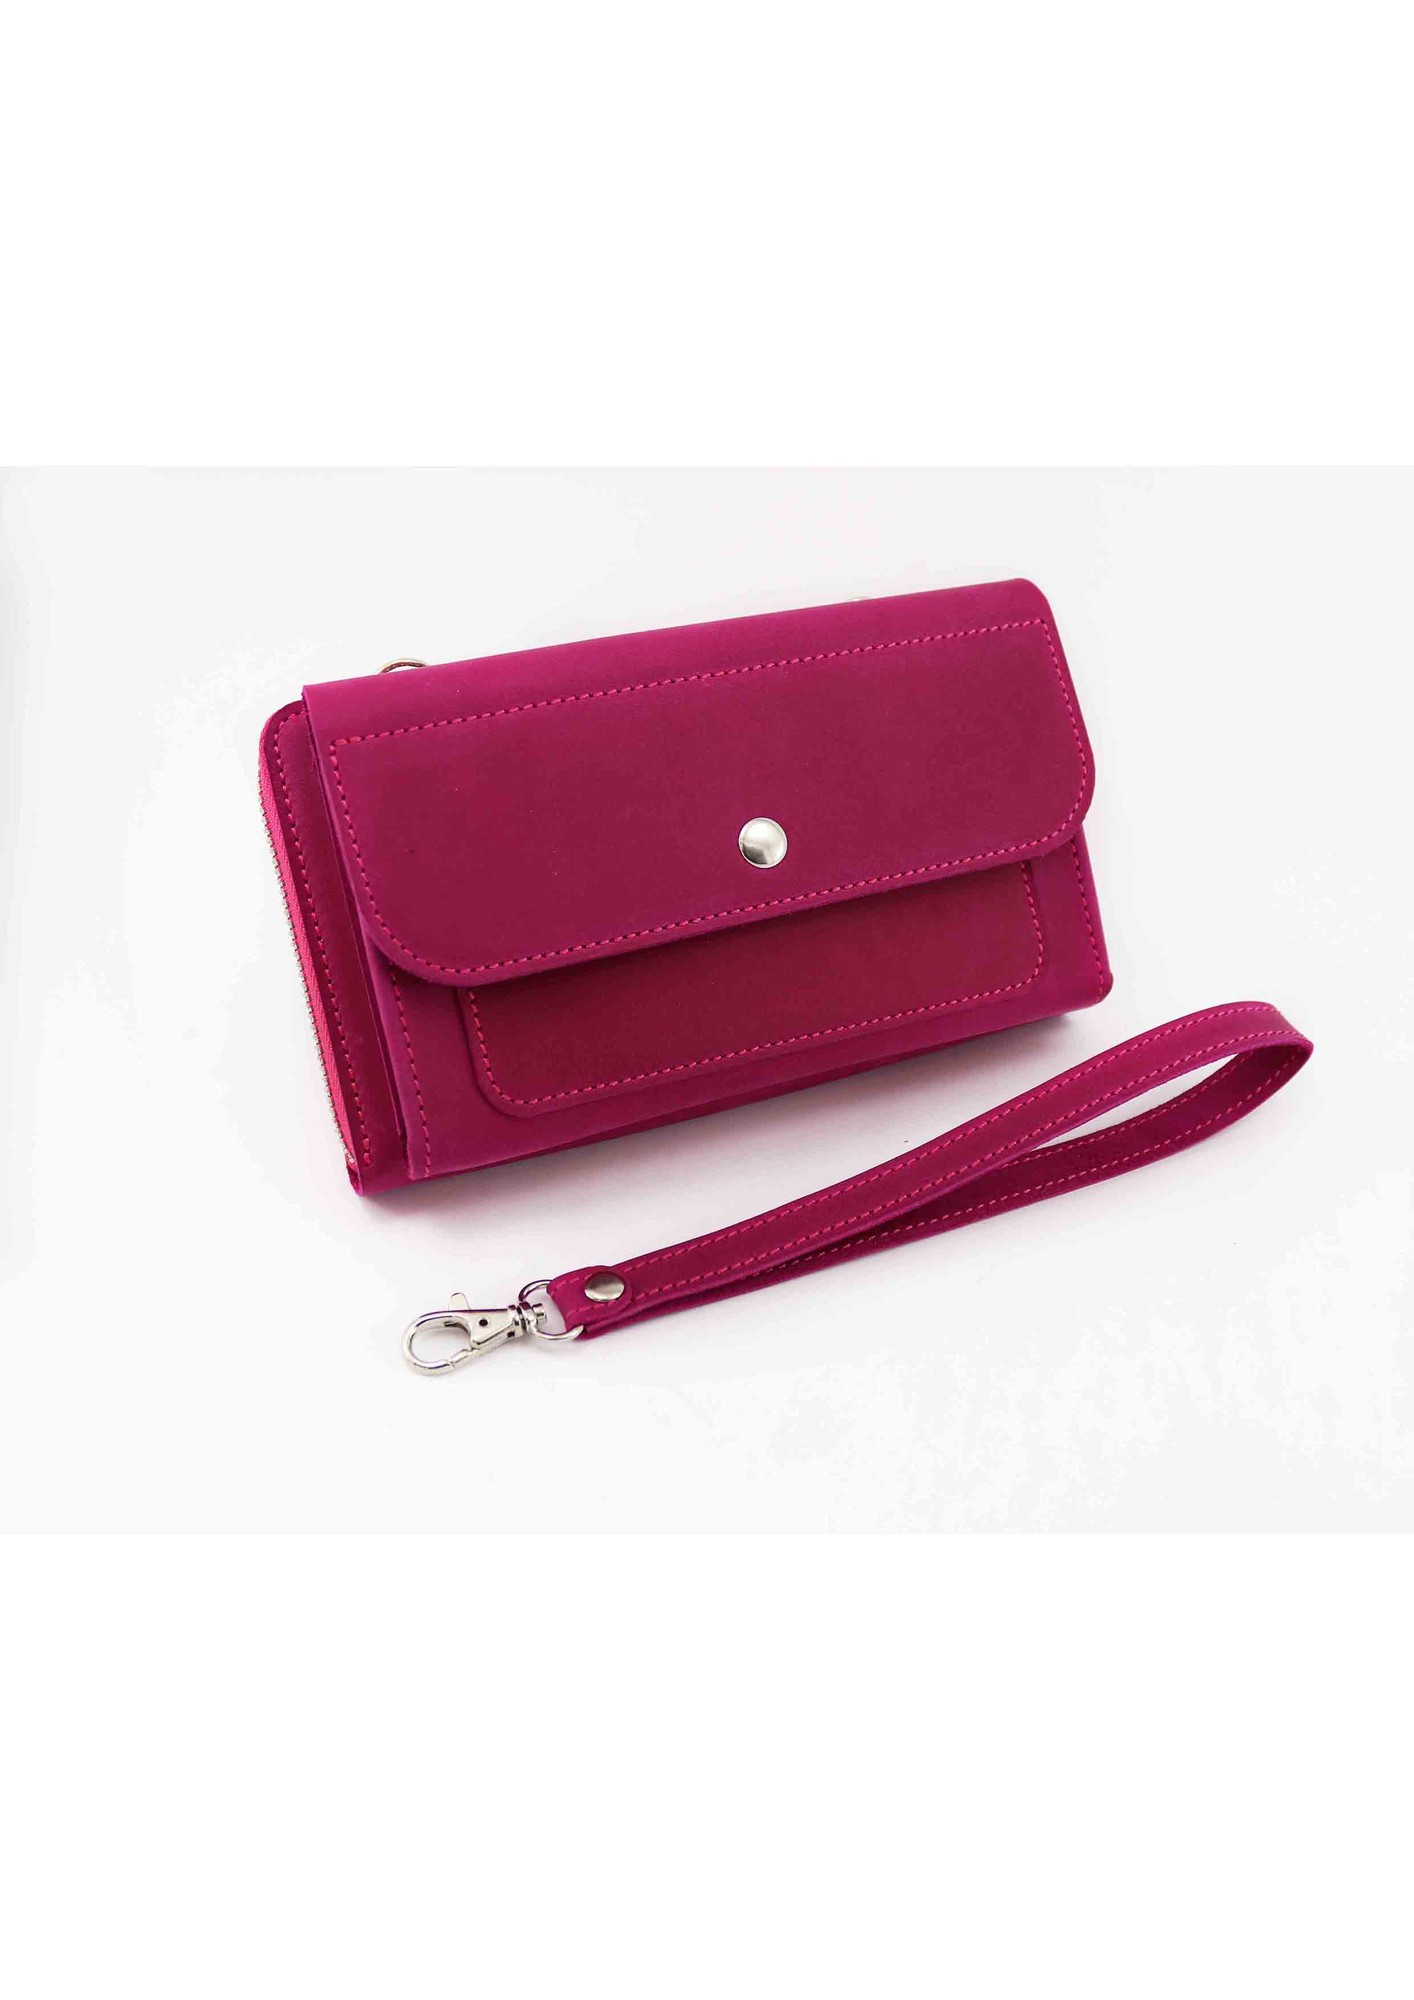 Womens crossbody leather bag-wallet with pocket for cell phone/ Pink - 01011